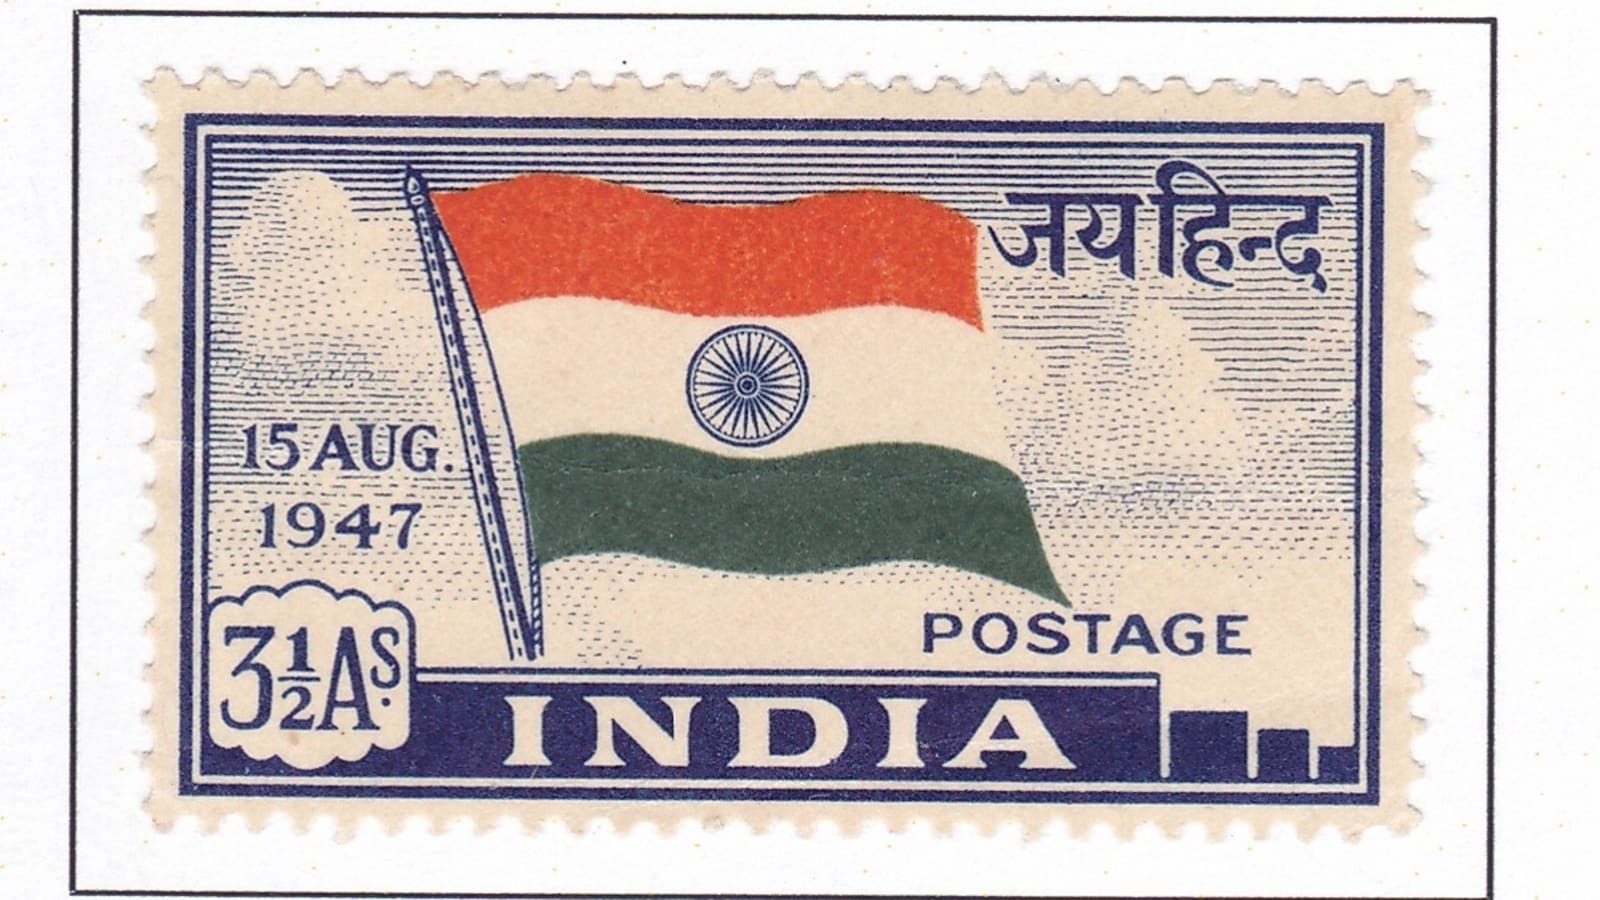 75th Independence Day: Ashwini Vaishnaw posts pic of postal stamp issued in 1947